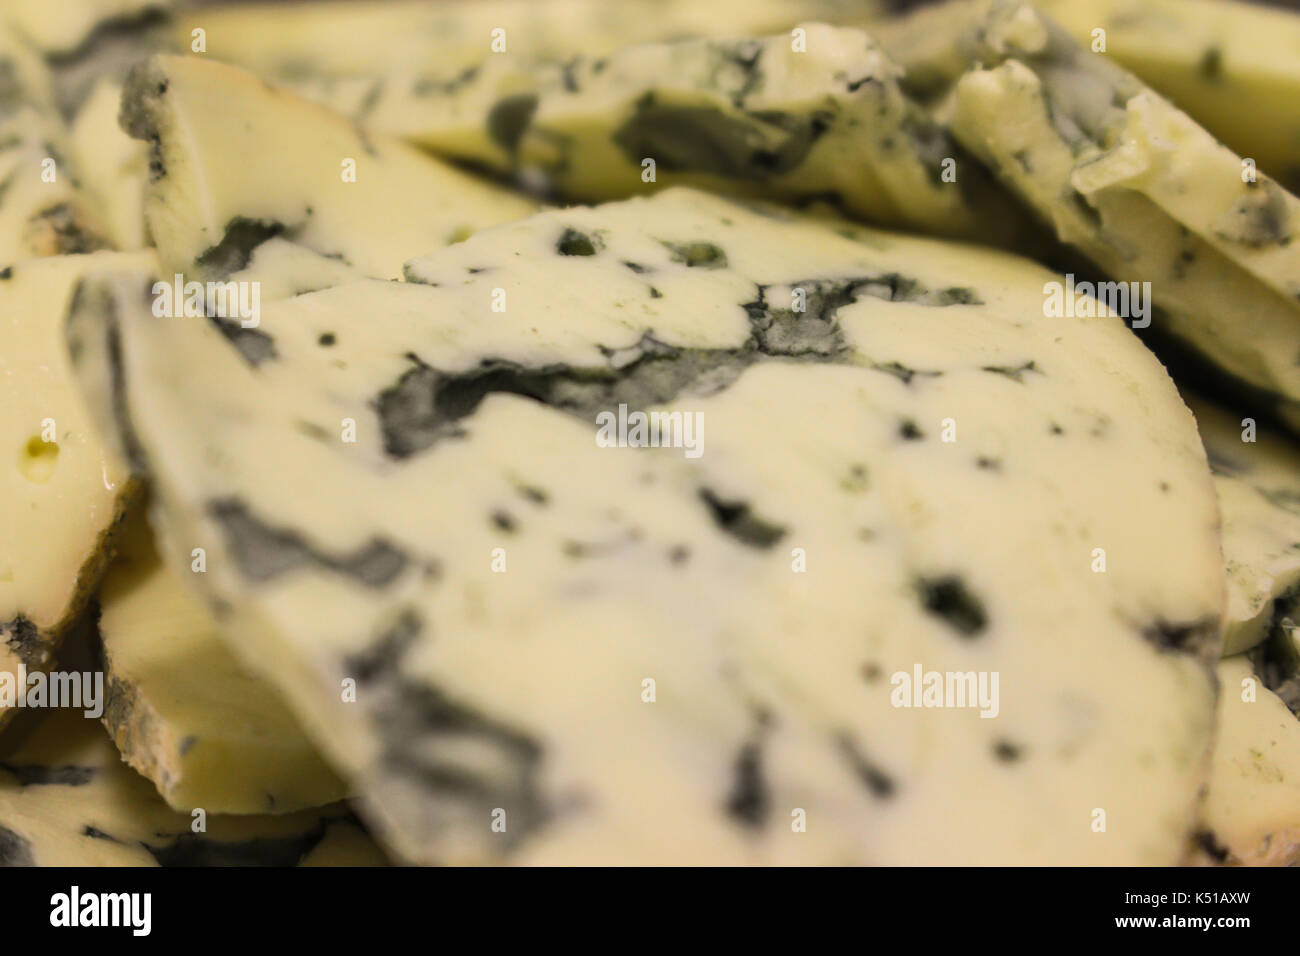 Tranches de fromage bleu fond in close up Banque D'Images